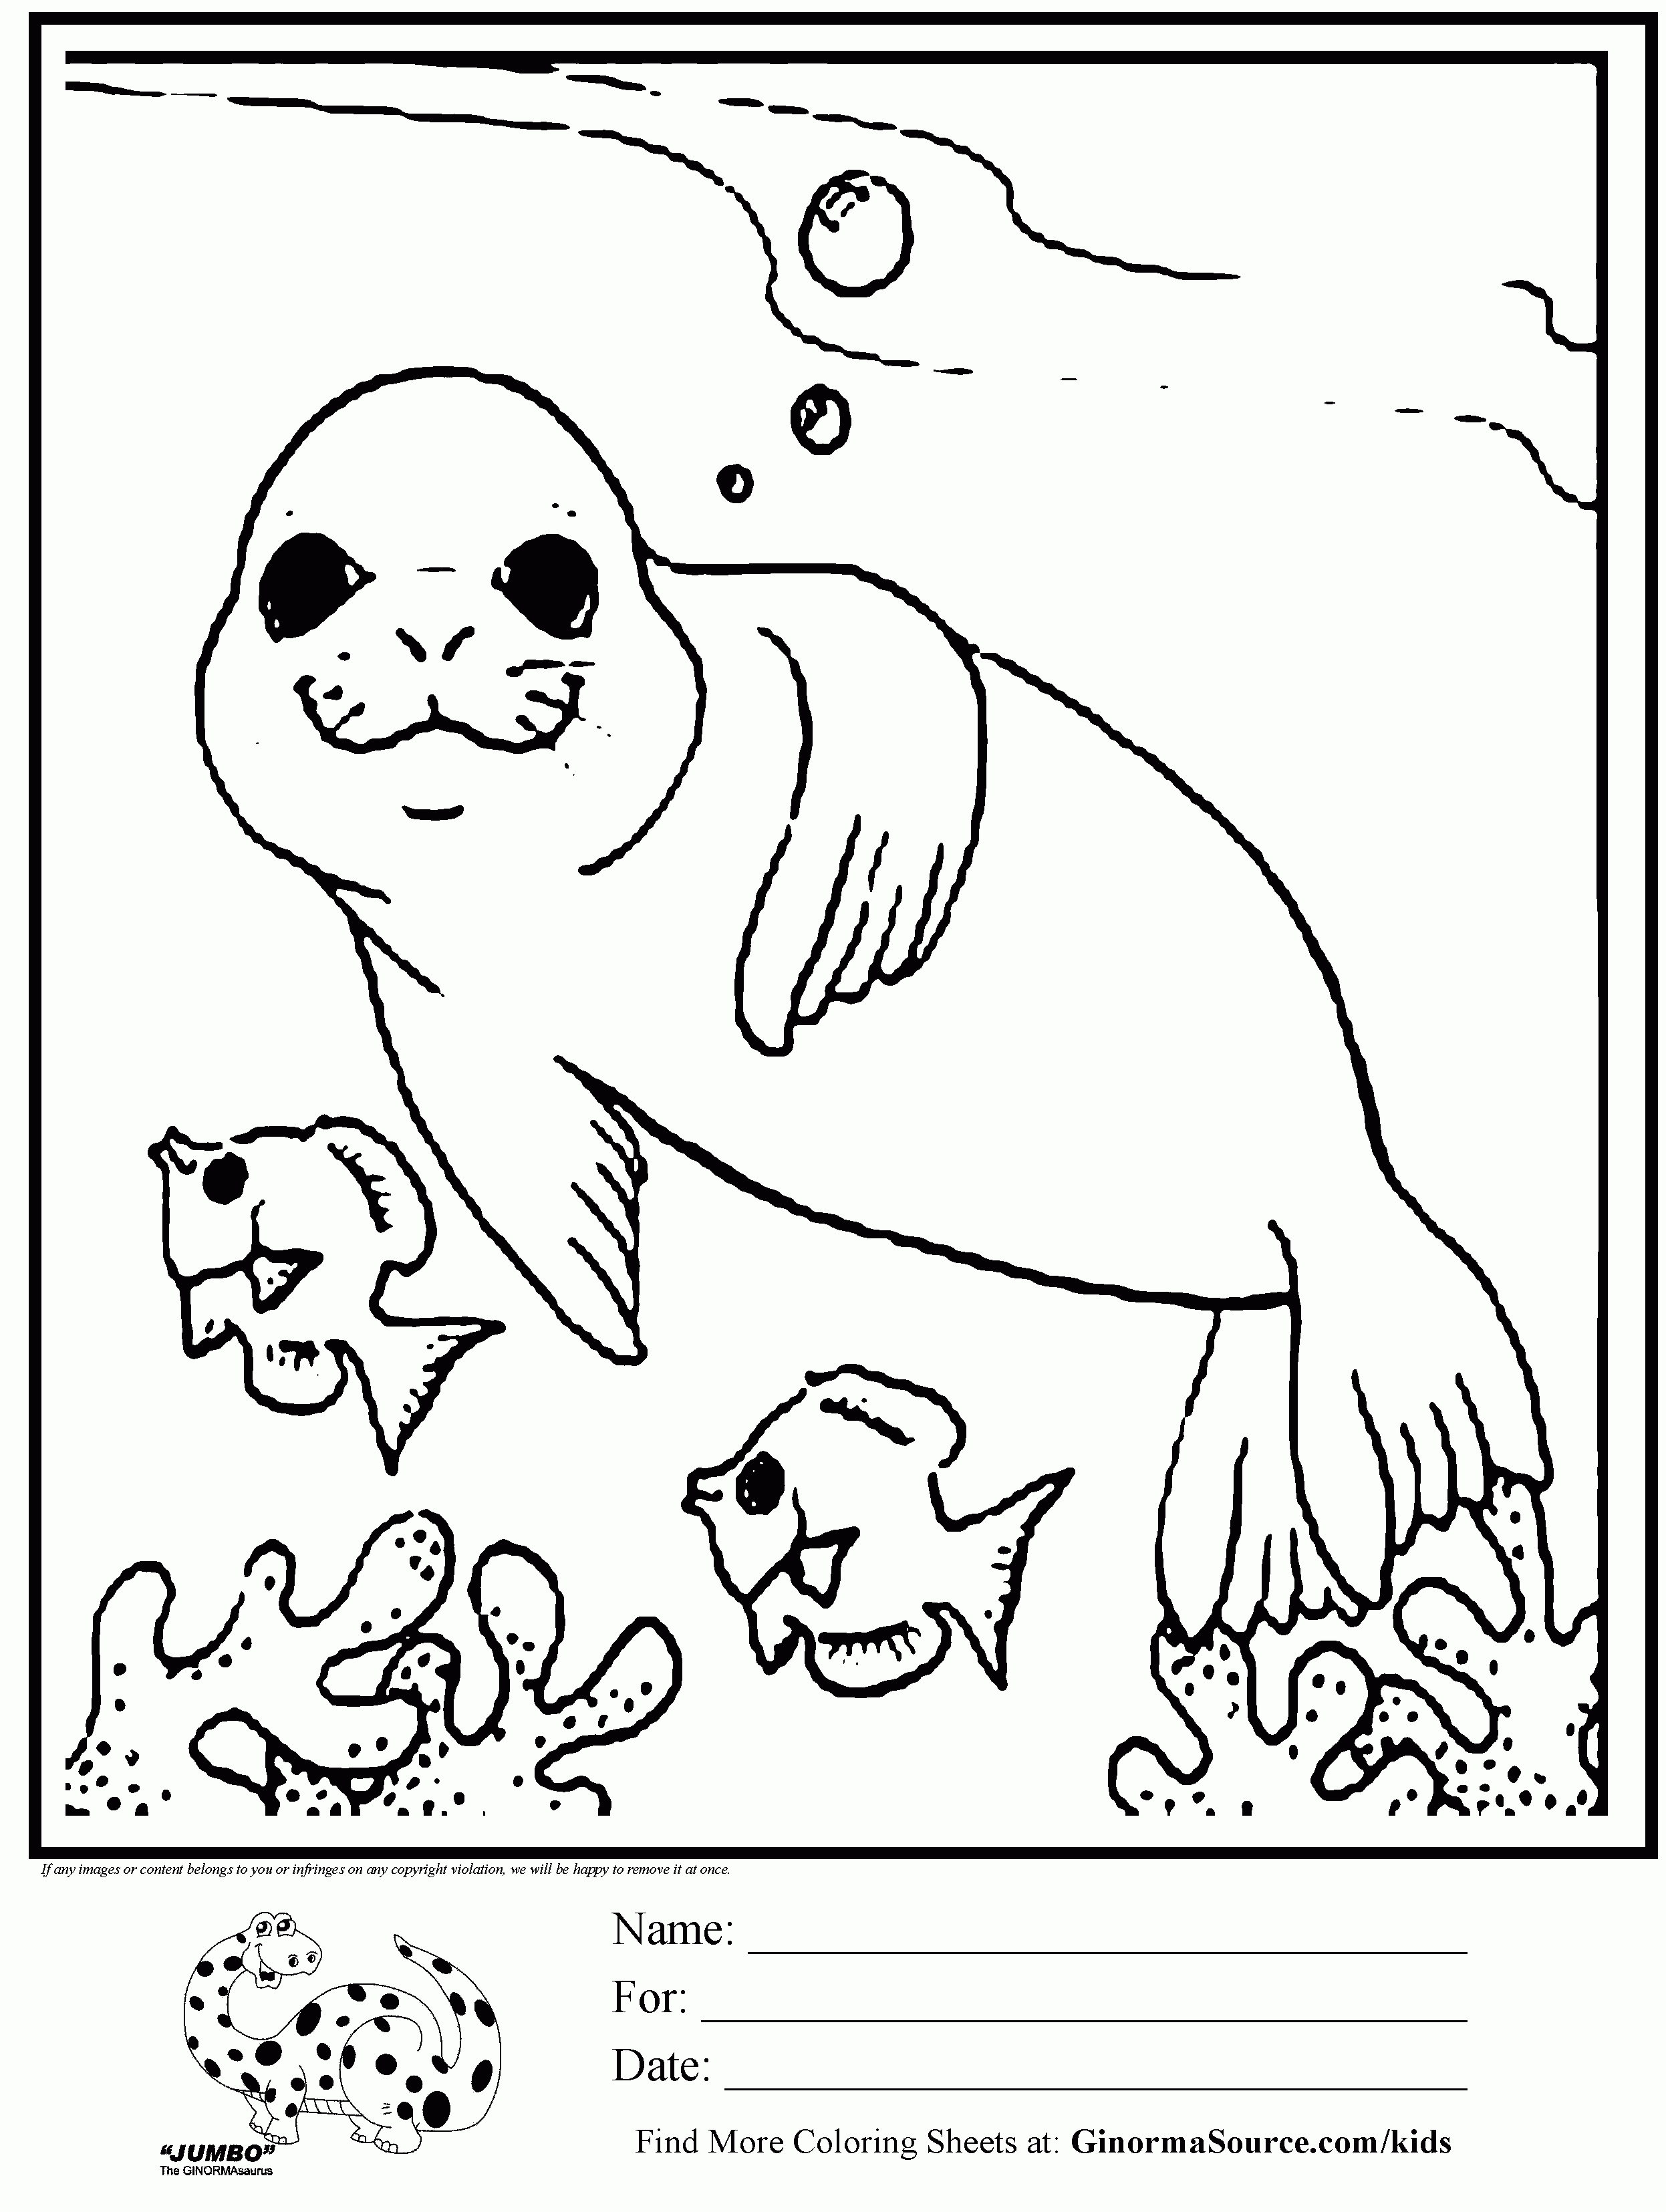 Seal Swimming With Fish Coloring Page